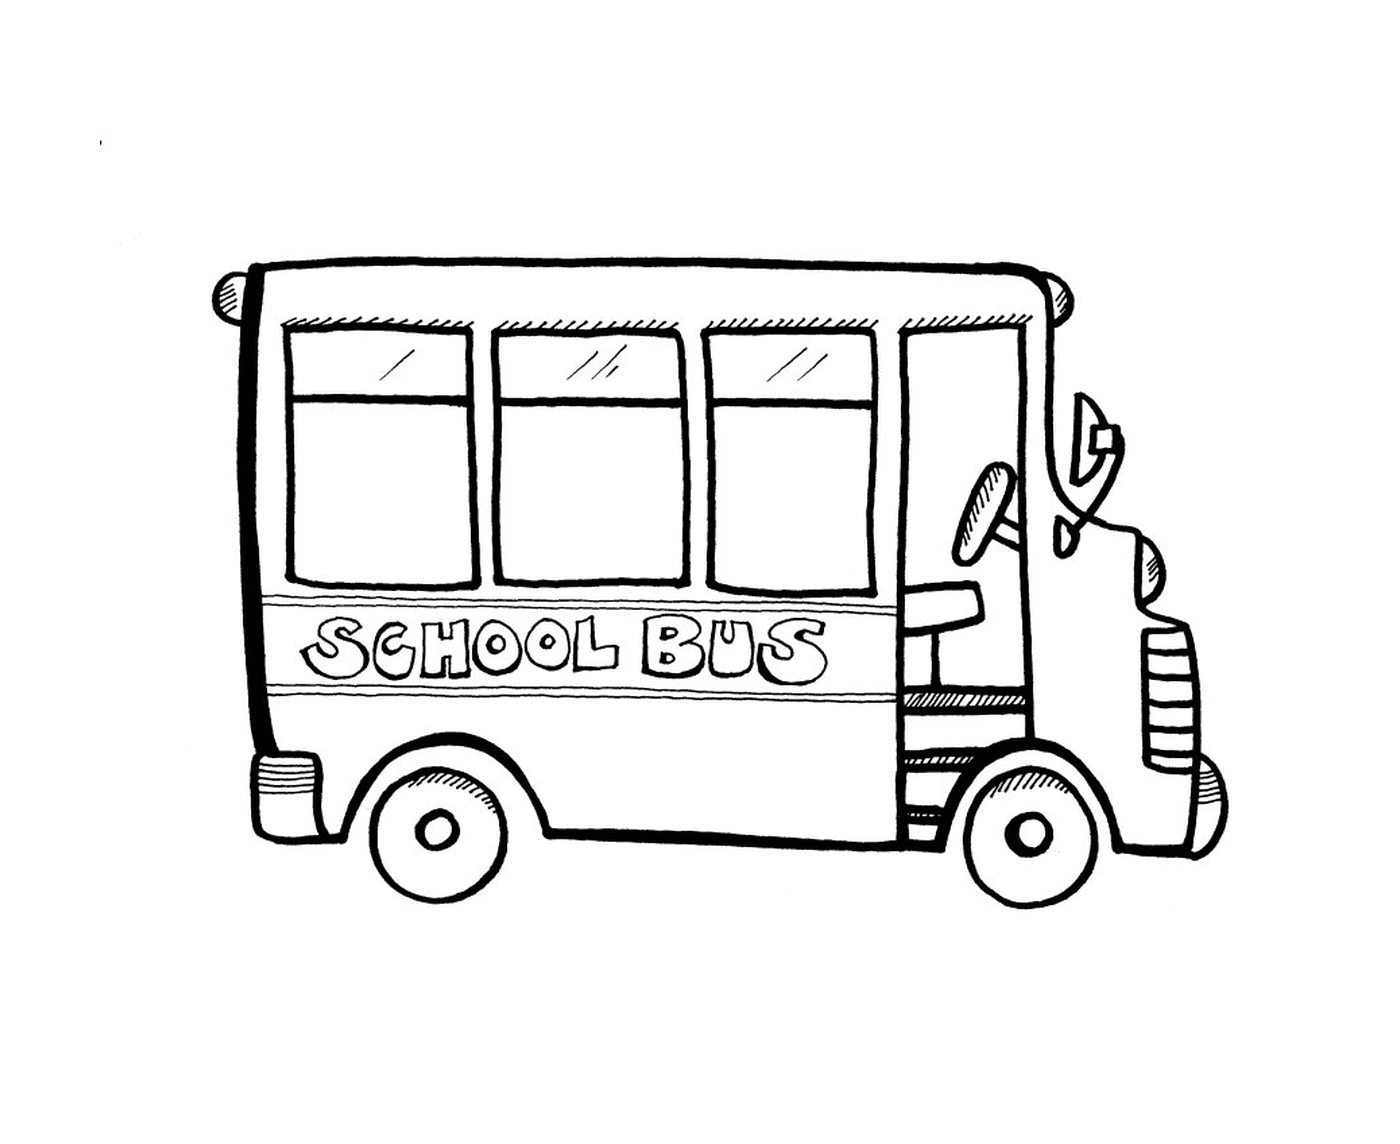  A school bus for the kids 